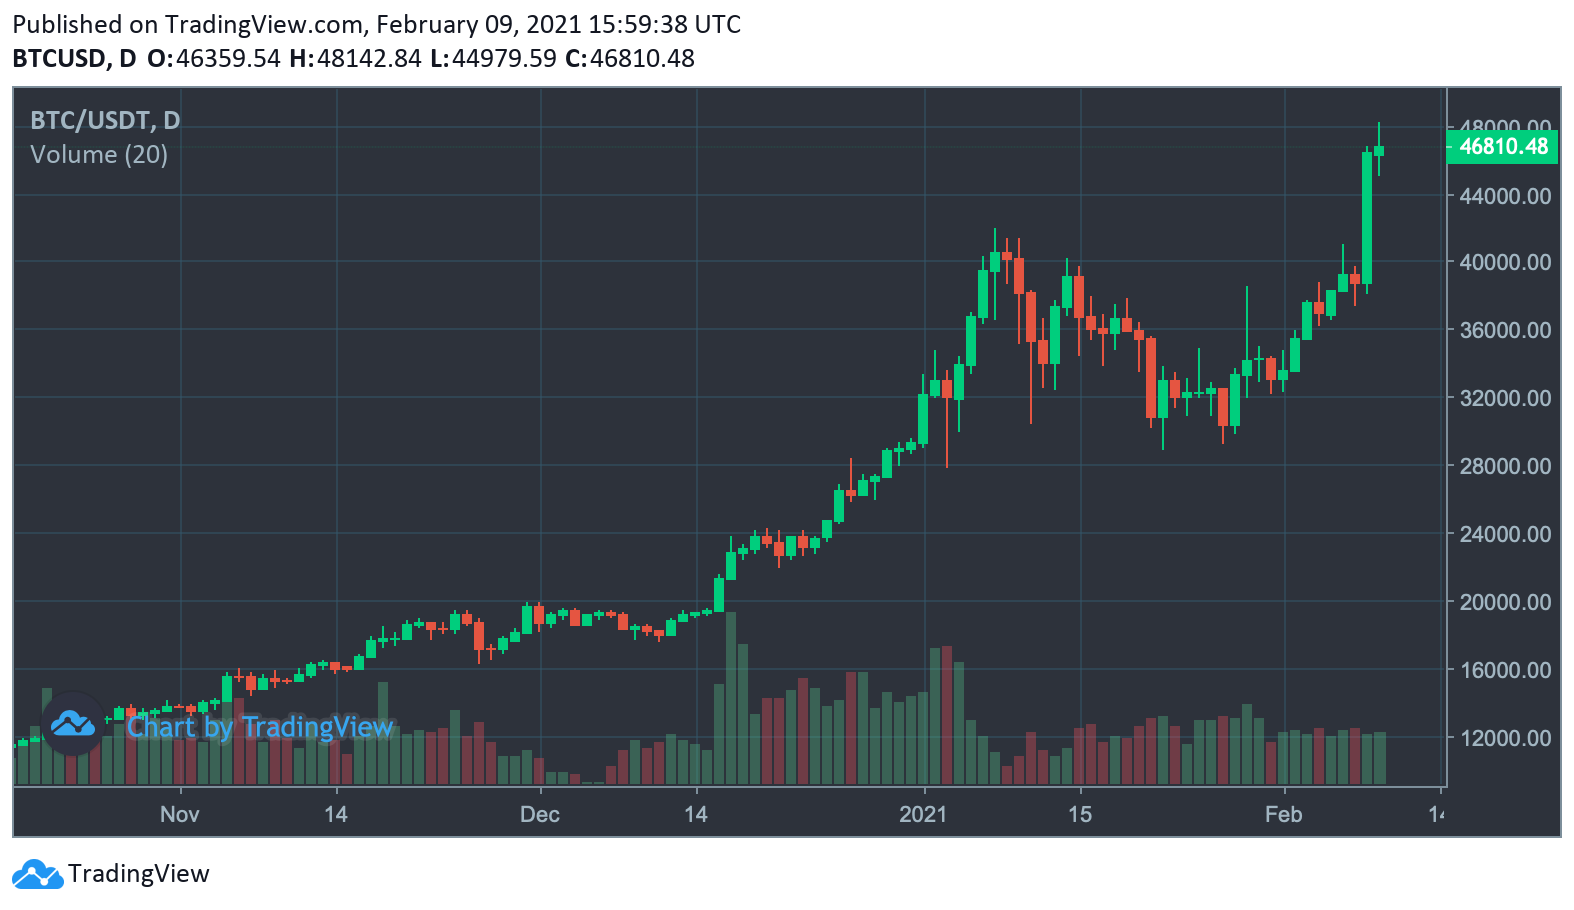 Bitcoin Taps $48K- Traders Discuss Overheated Stats and a Possible Chinese New Year Dump